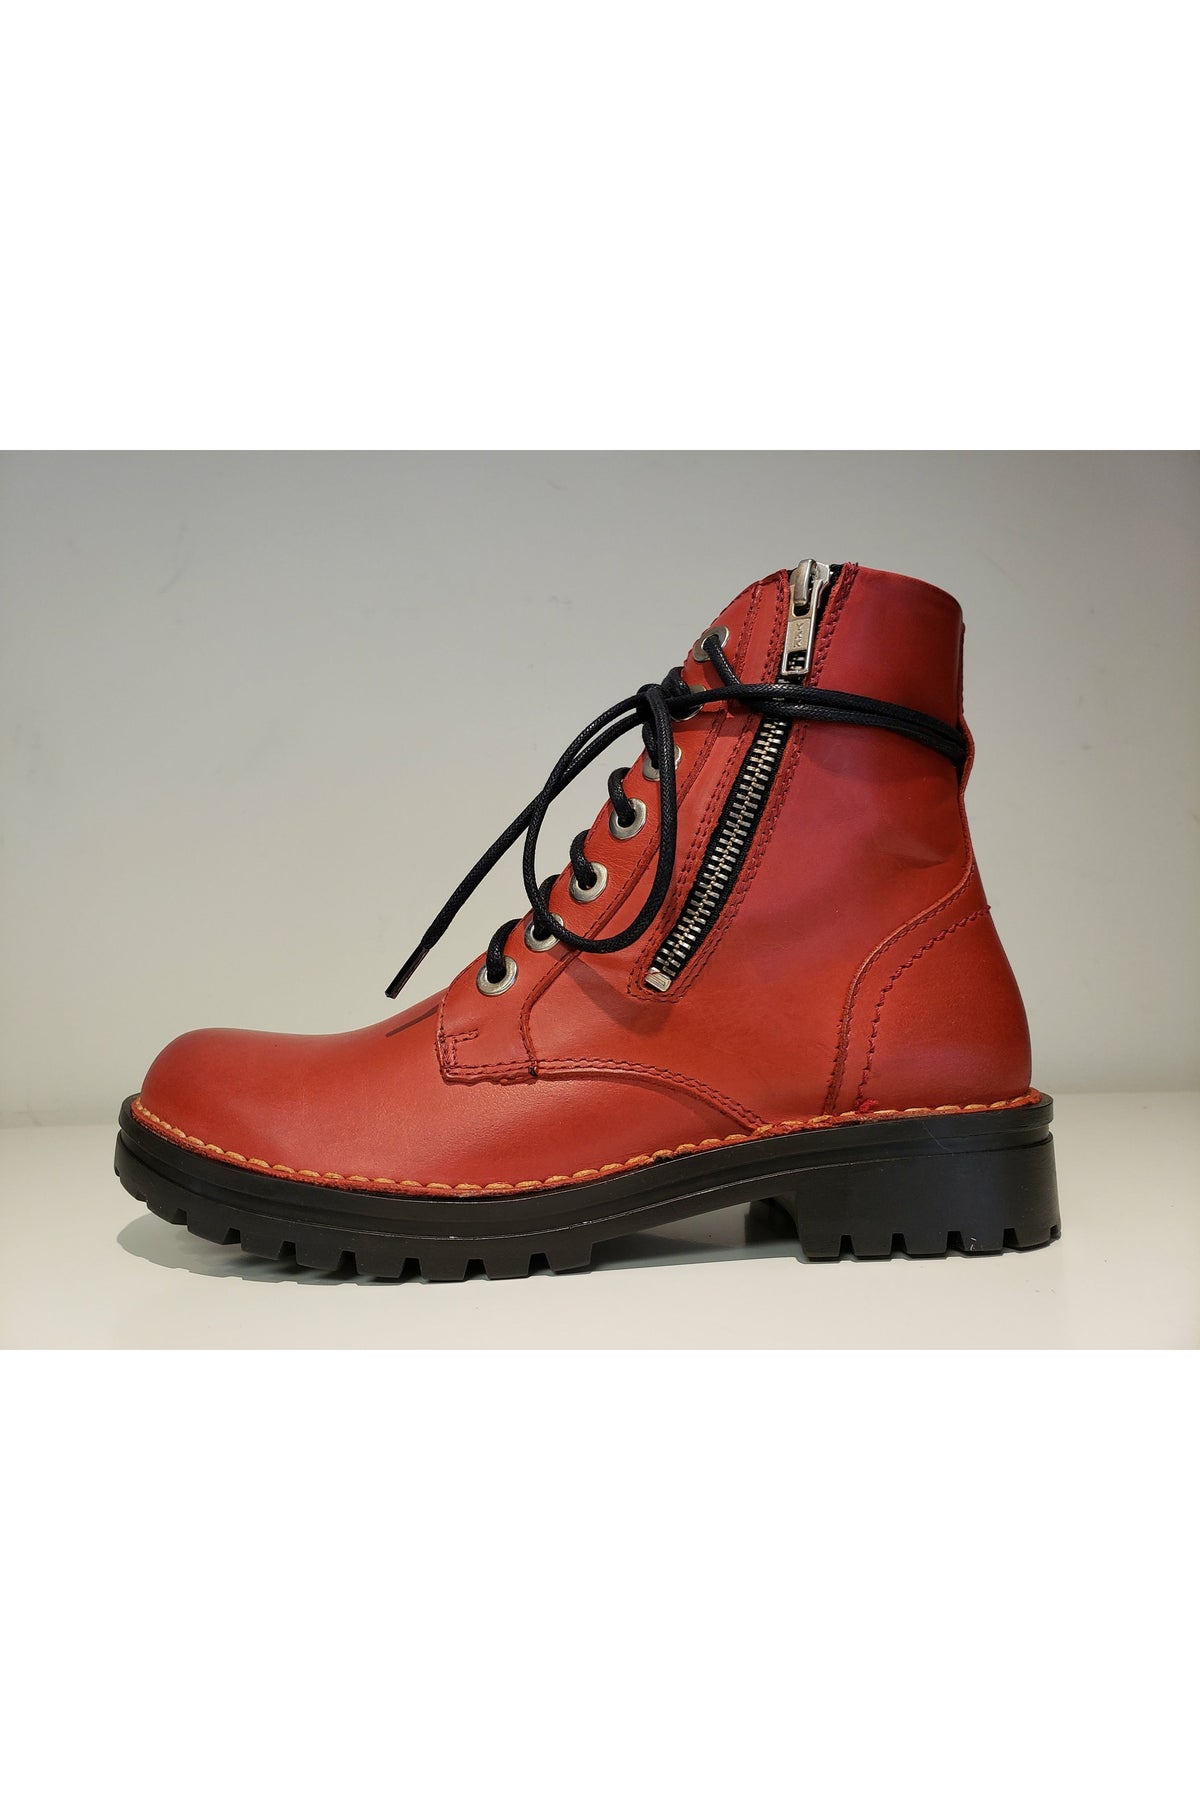 Chacal Madison Ankle Boot - Style 5667, outside, rojo